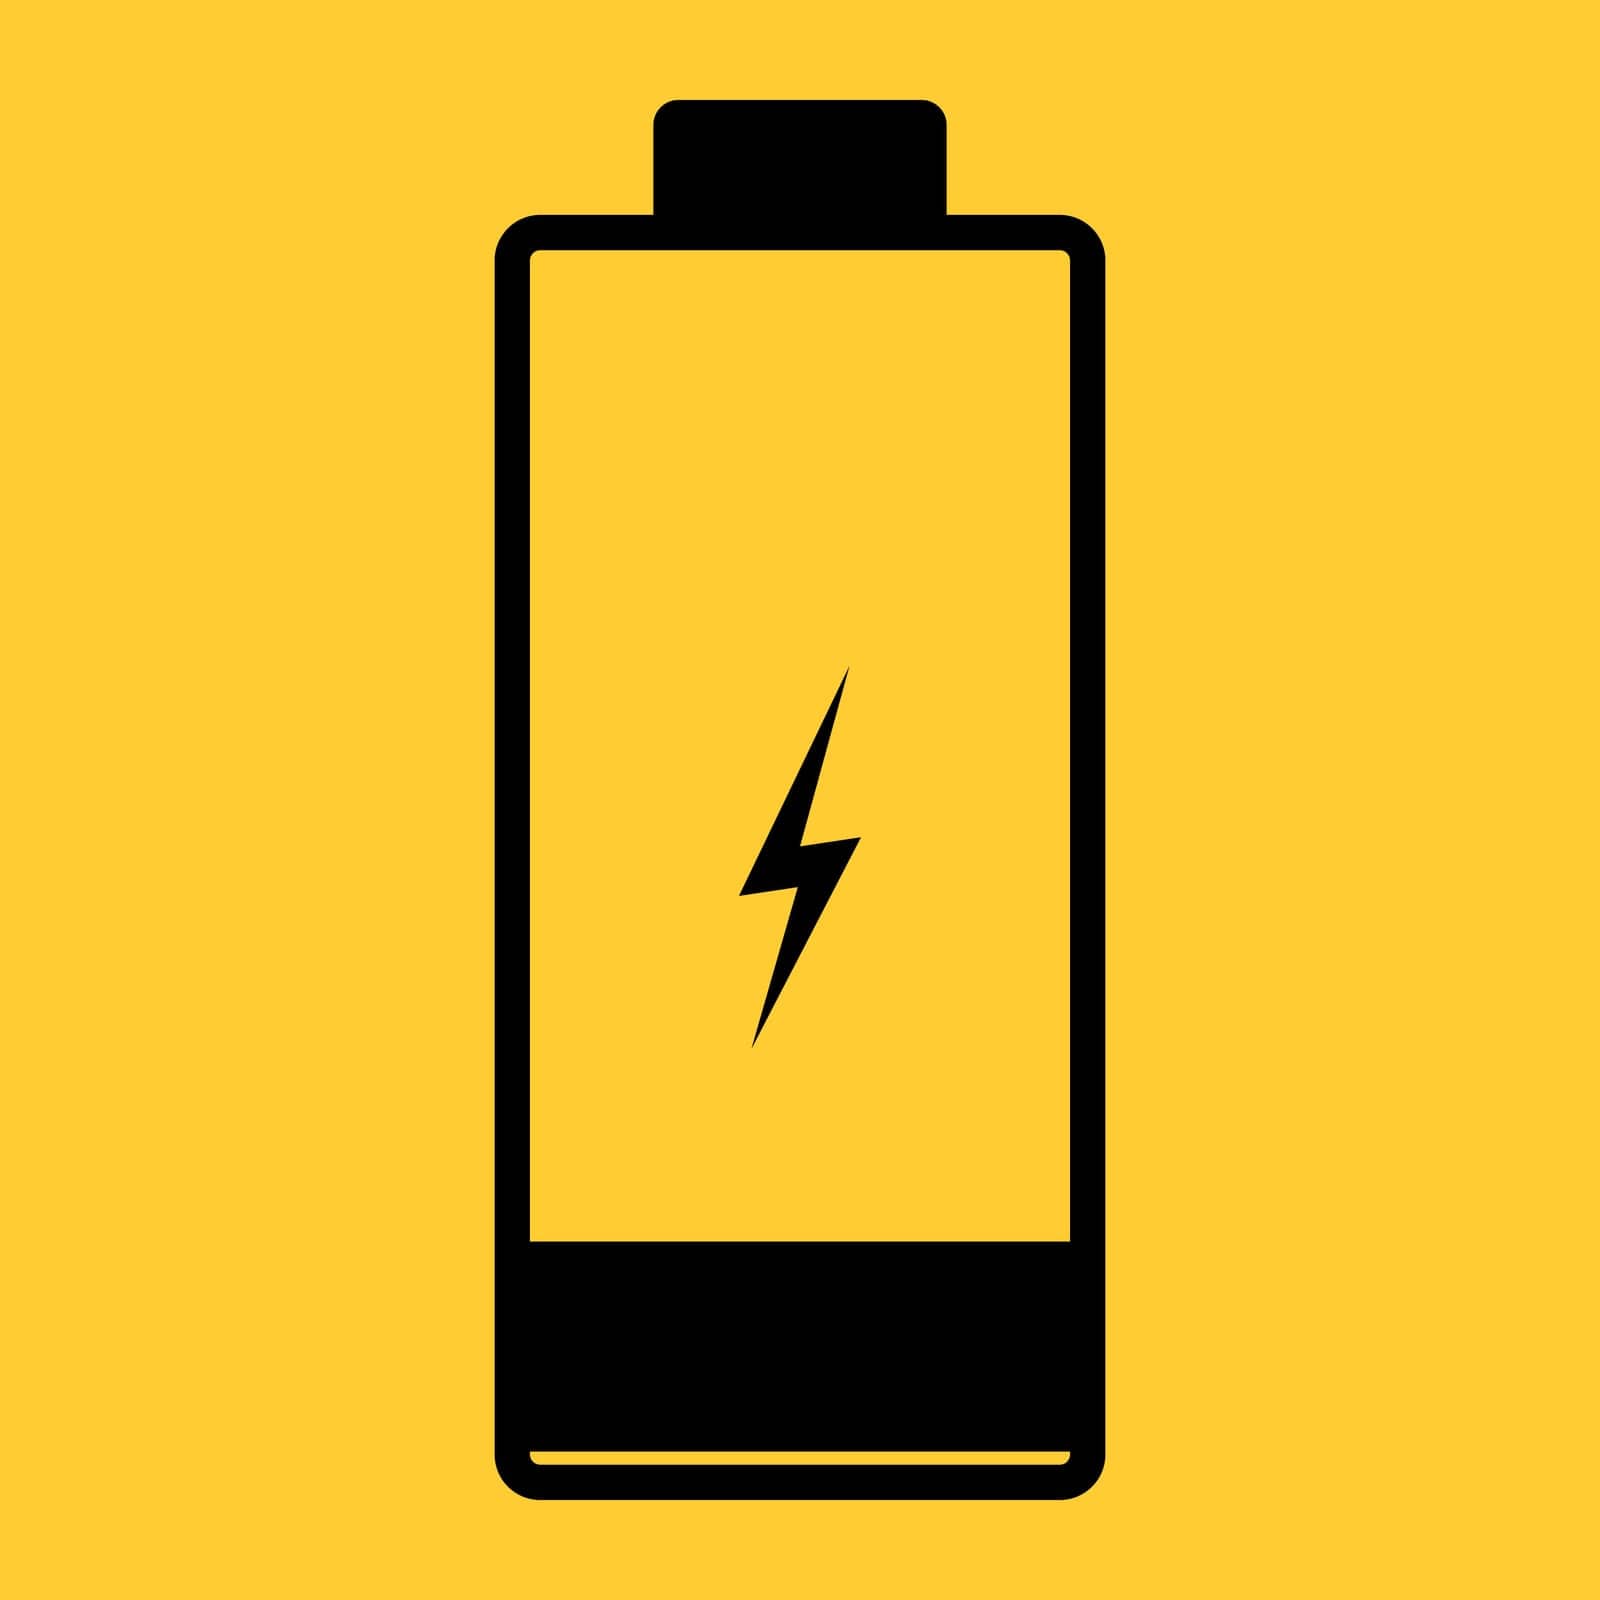 Low battery illustration. Black and yellow colors. Vector icon